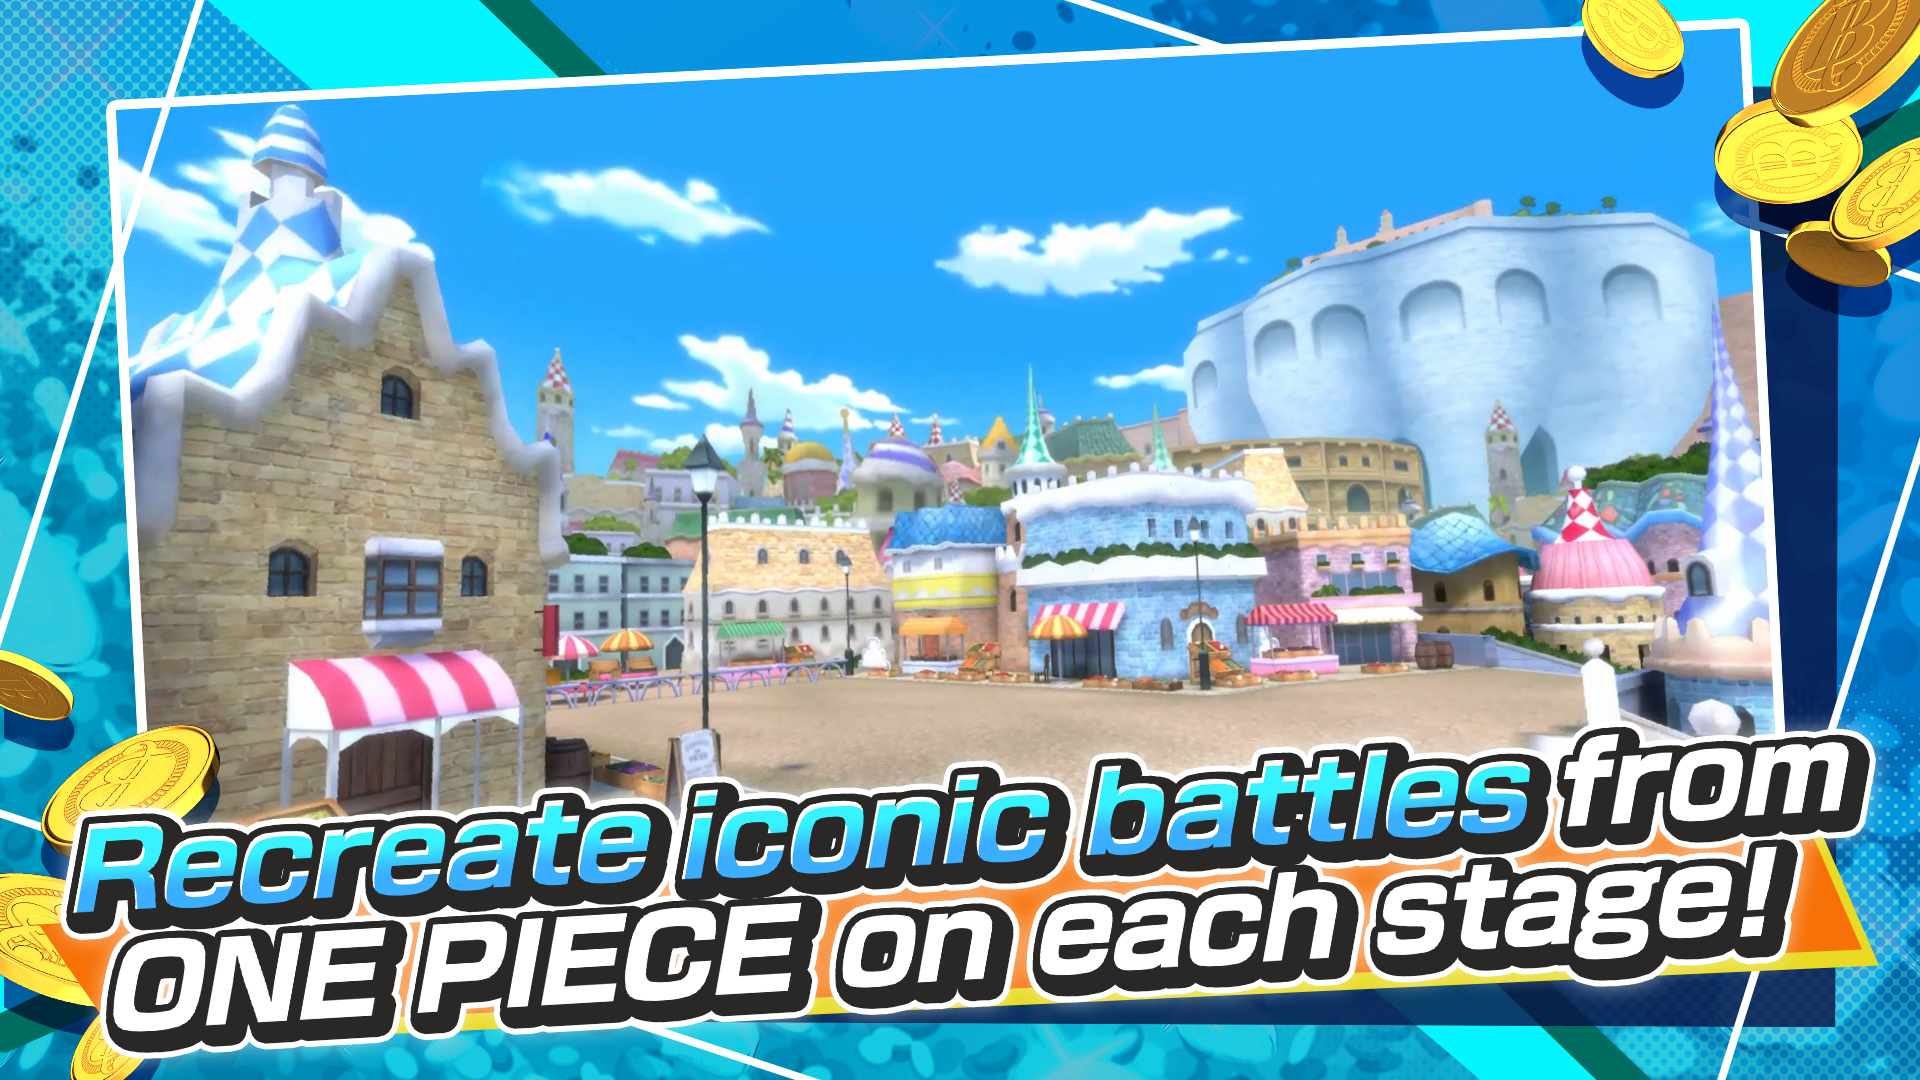 ONE PIECE Bounty Rush APK Download for Android Free